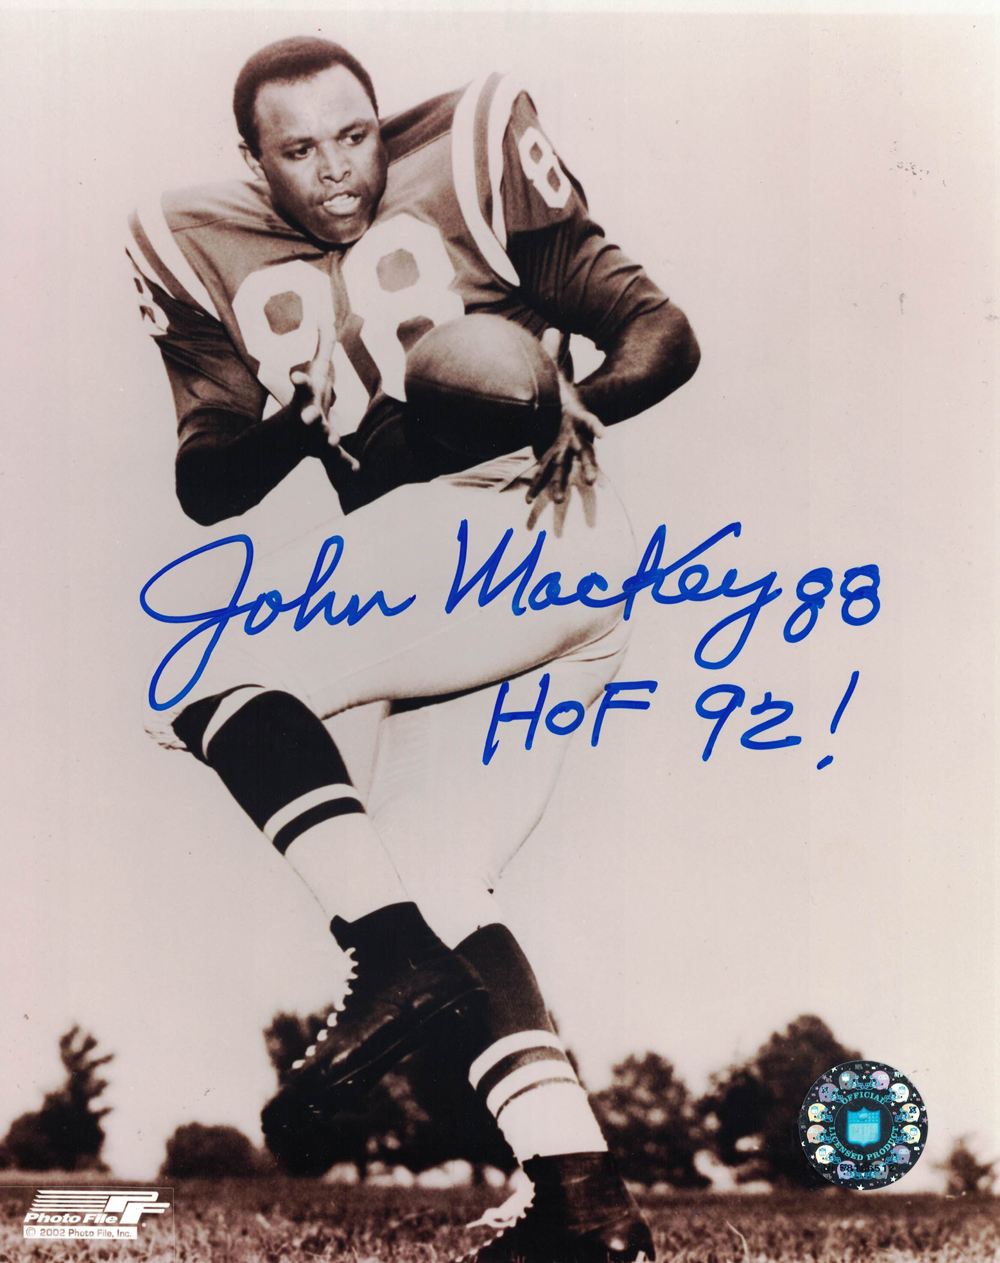 John Mackey Autographed/Signed Baltimore Colts 8x10 Photo 27865